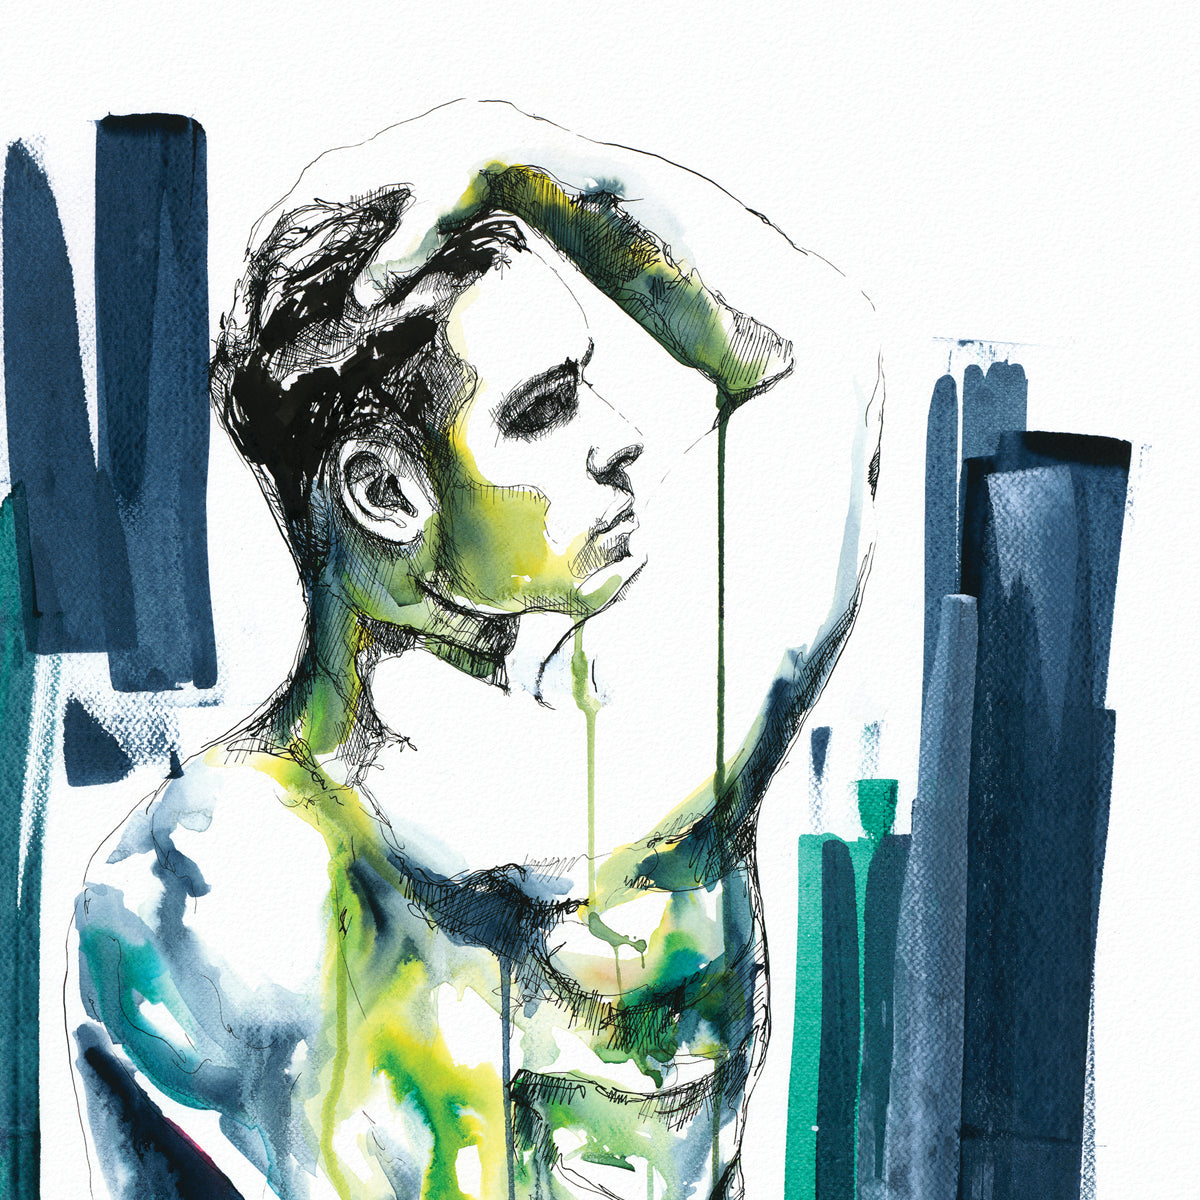 Dreamer's Solitude: Muscular Male Figure with Strong Back and Defined Buttocks Amidst Urban Tones - Giclee Art Print